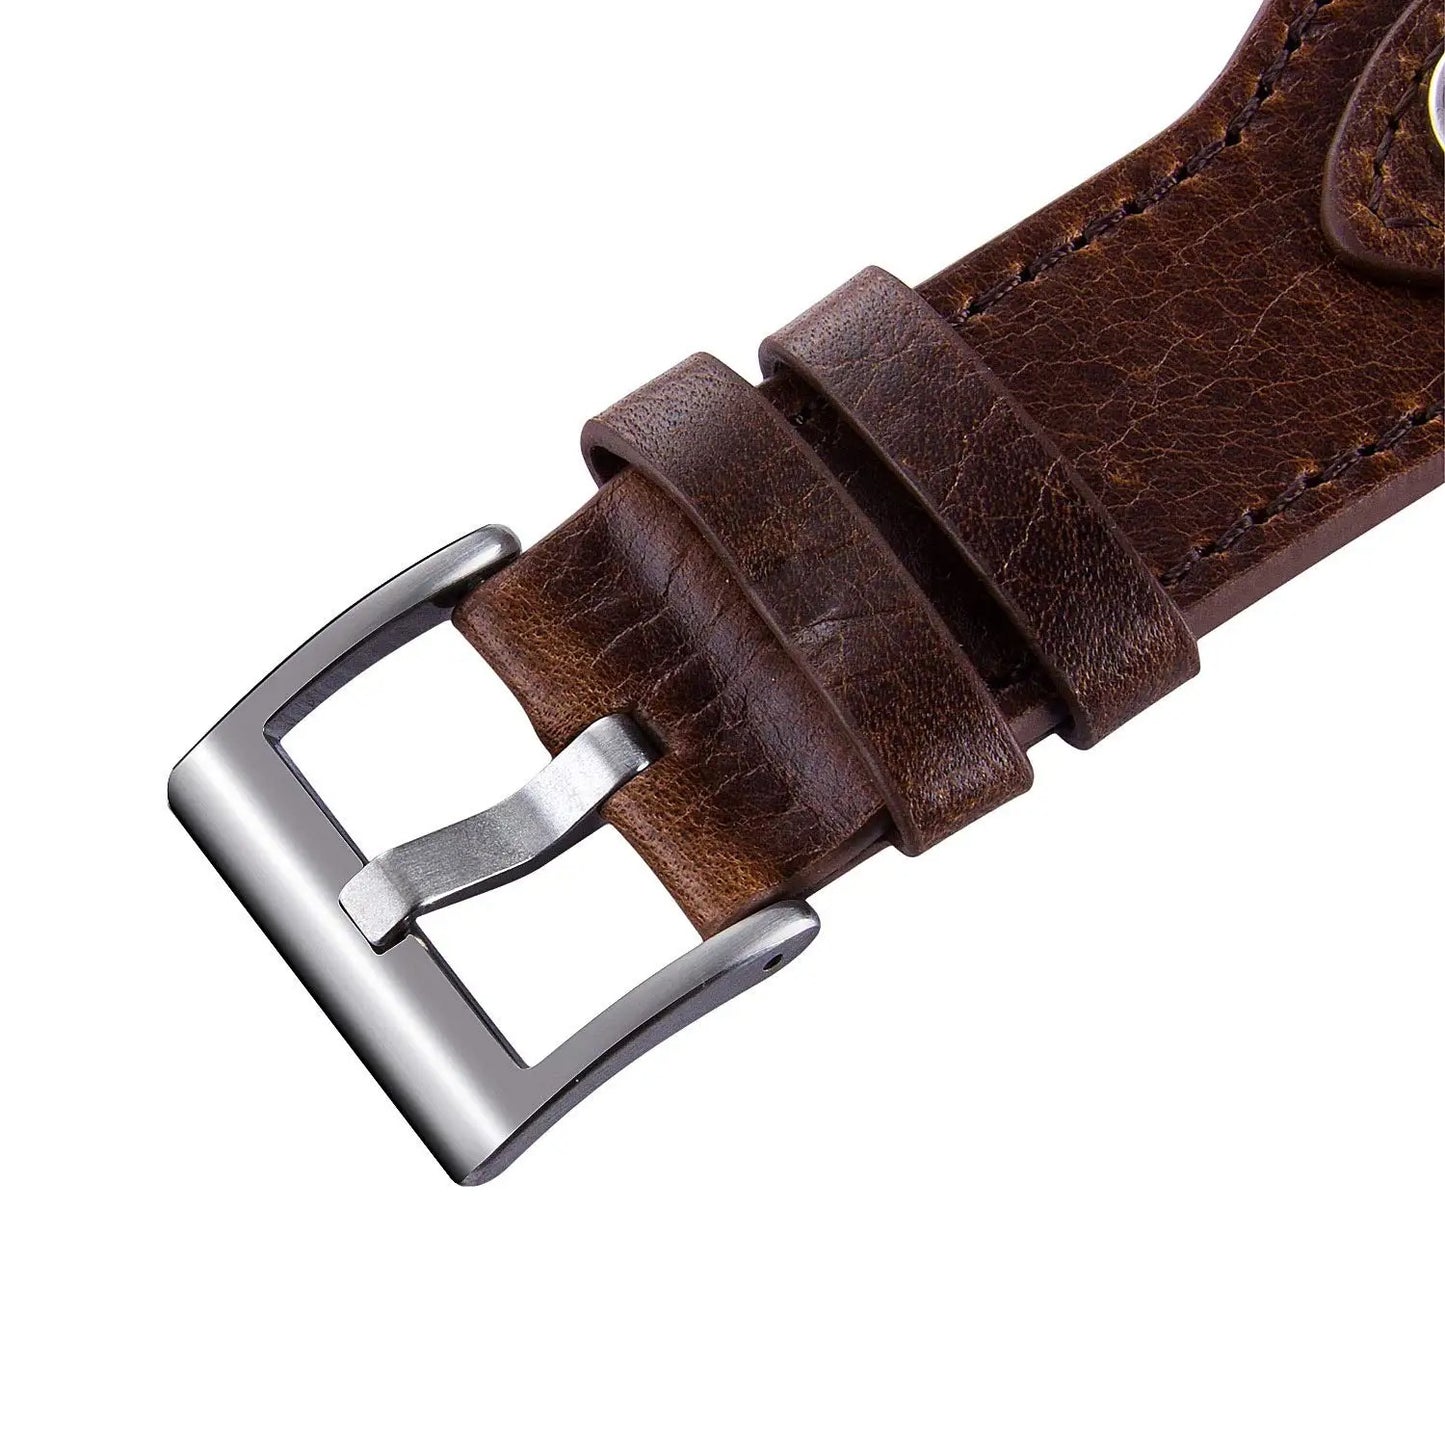 Clasp of Wide Leather Apple Watch Band